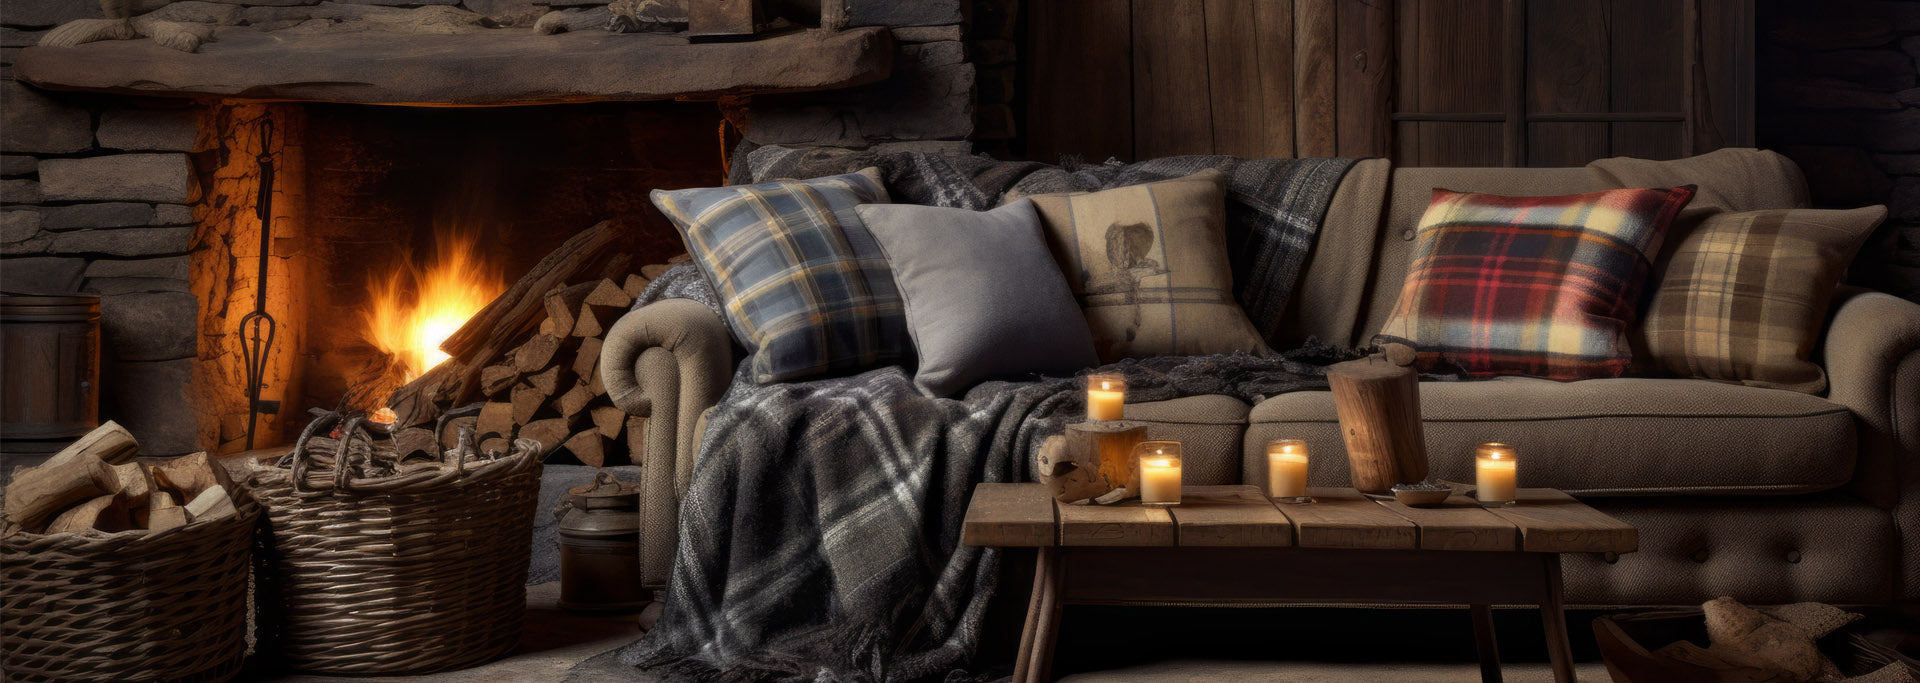 rustic charm - cozy room with fireplace, sofa and woven throws and blankets